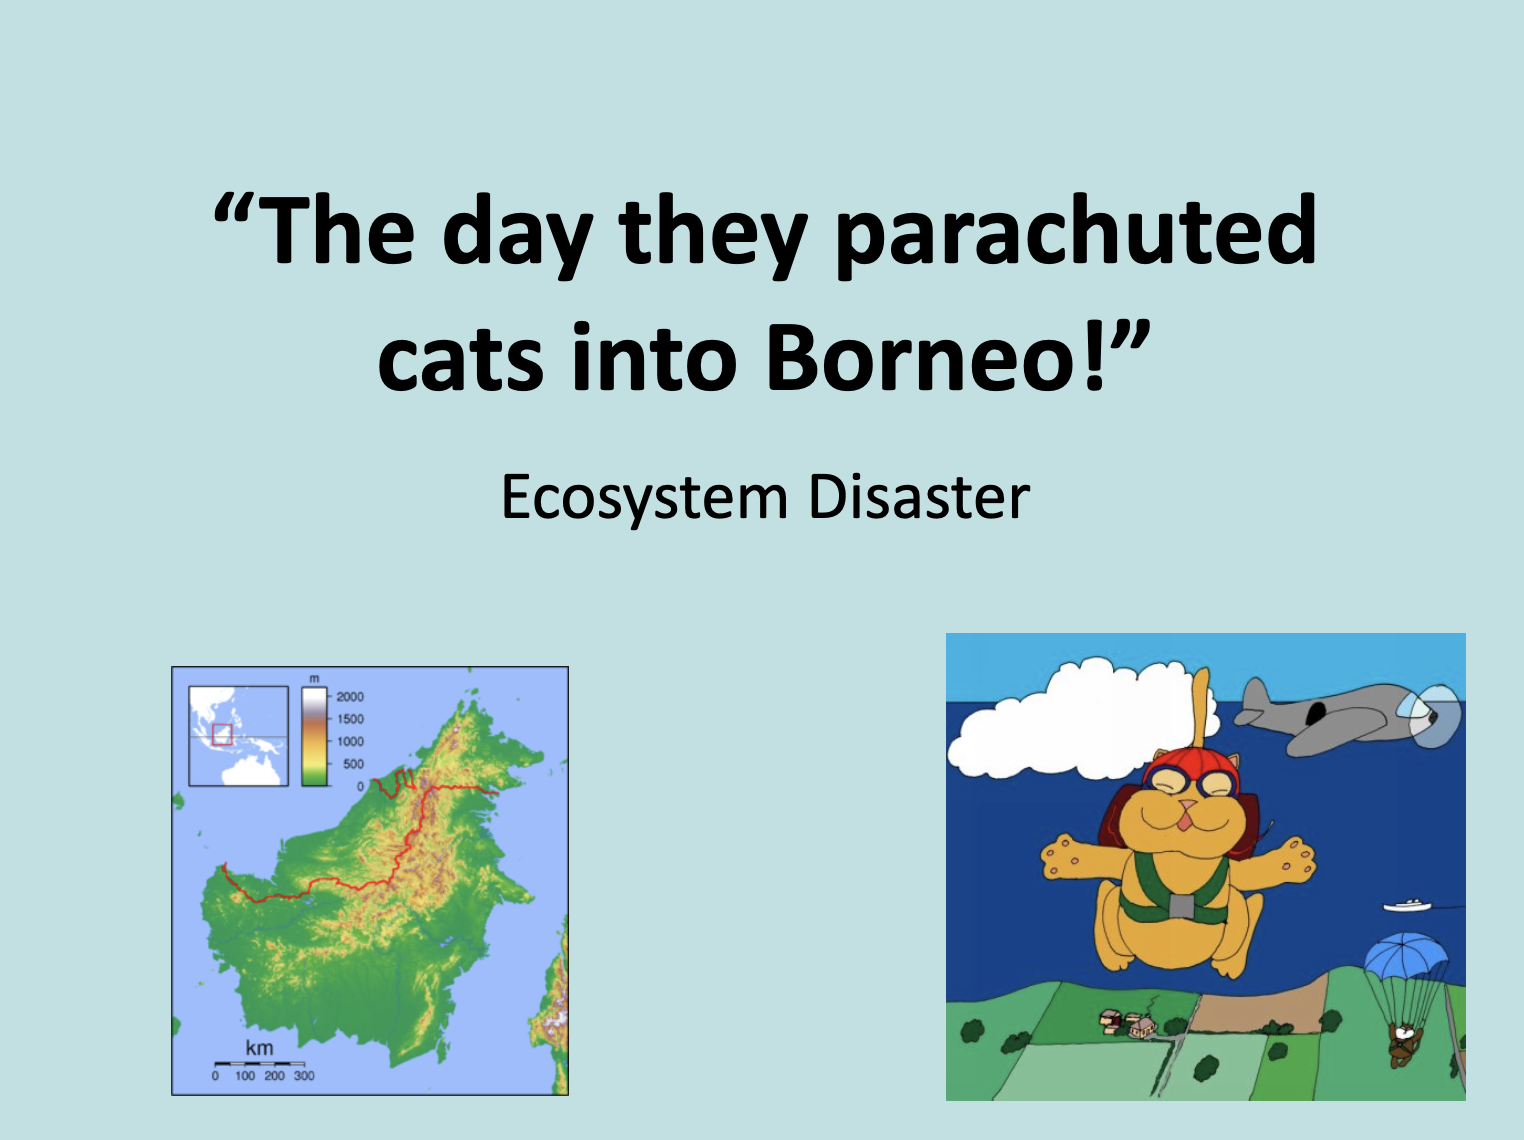 The Day they parachuted cats into Borneo.